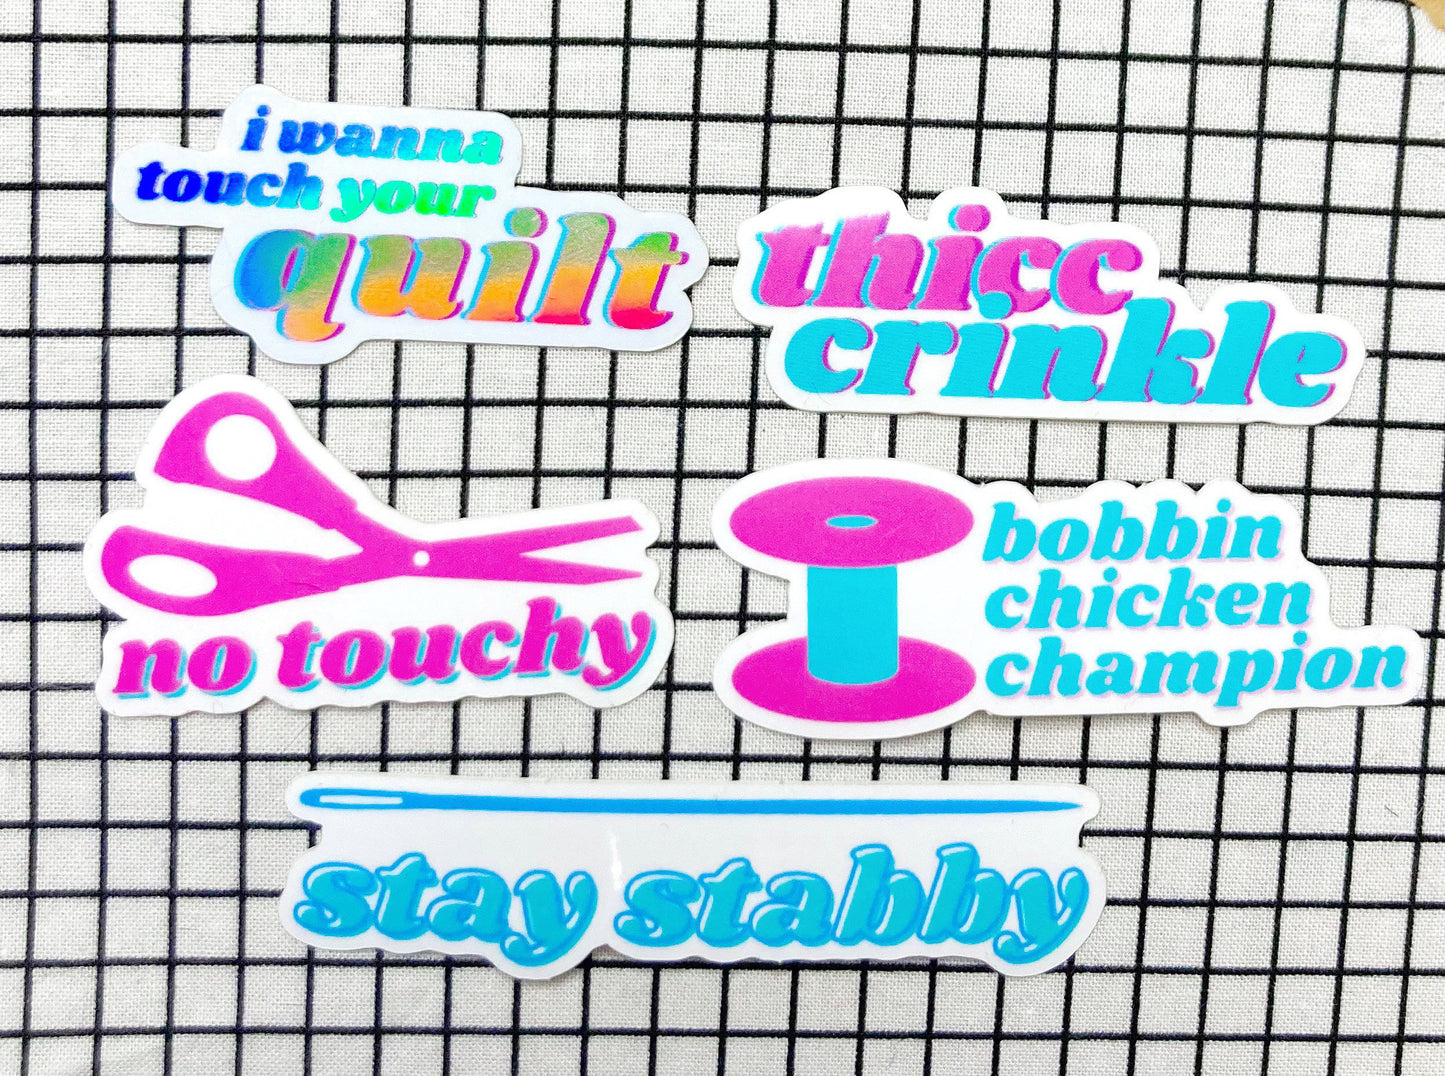 No Touchy! sewing scissor and quilting vinyl sticker